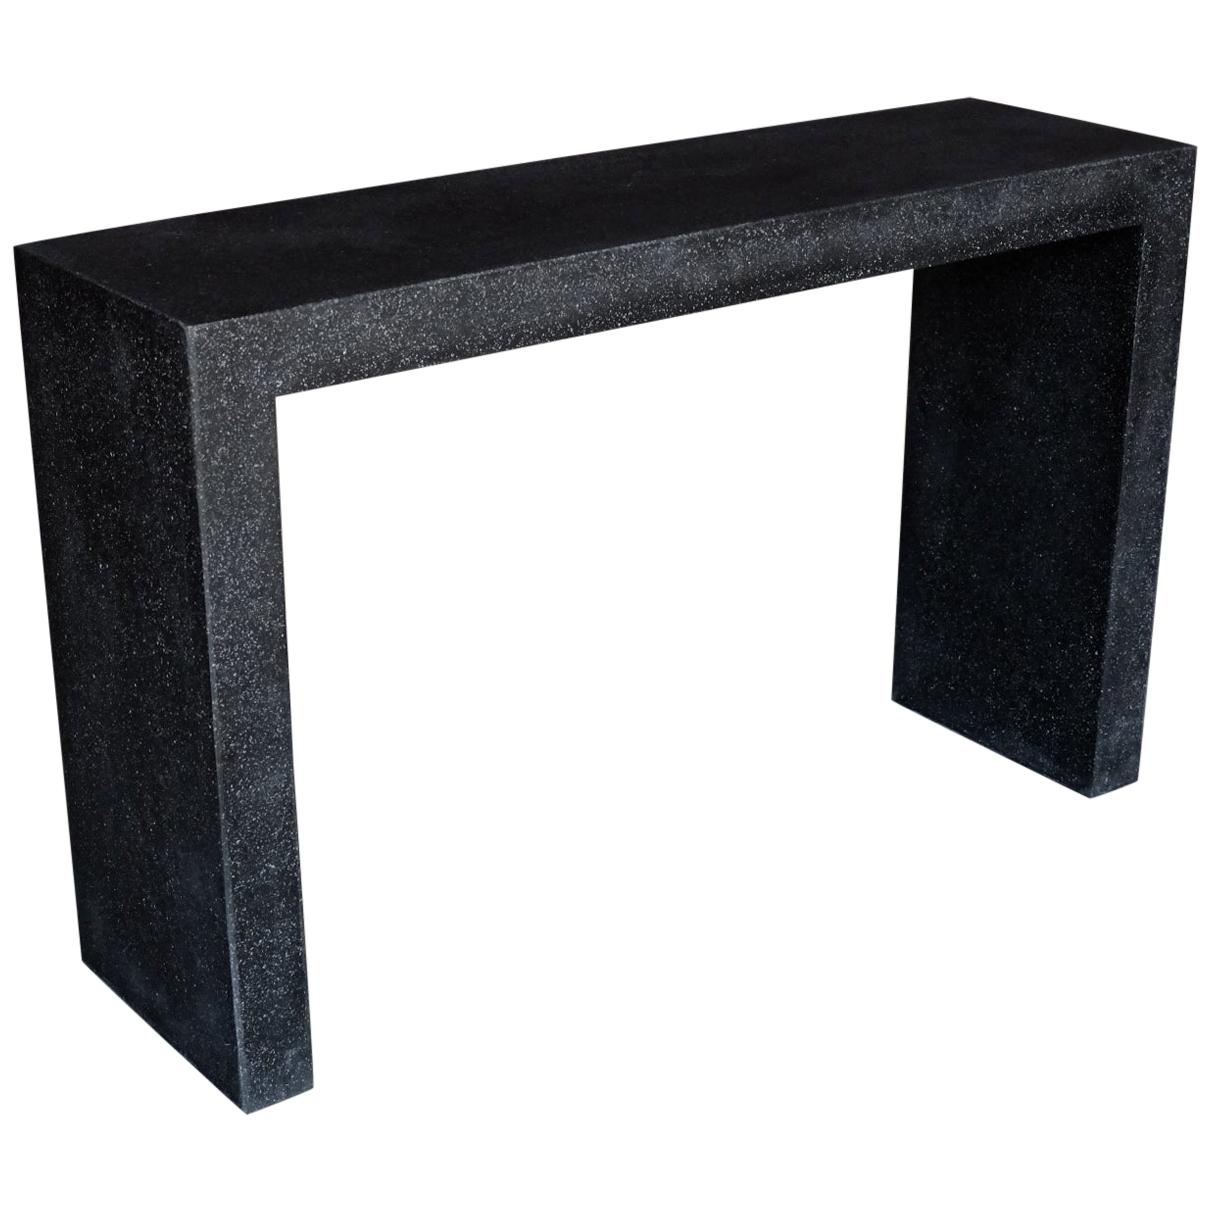 Cast Resin 'Lynne Tell' Console Table, Coal Stone Finish by Zachary A. Design